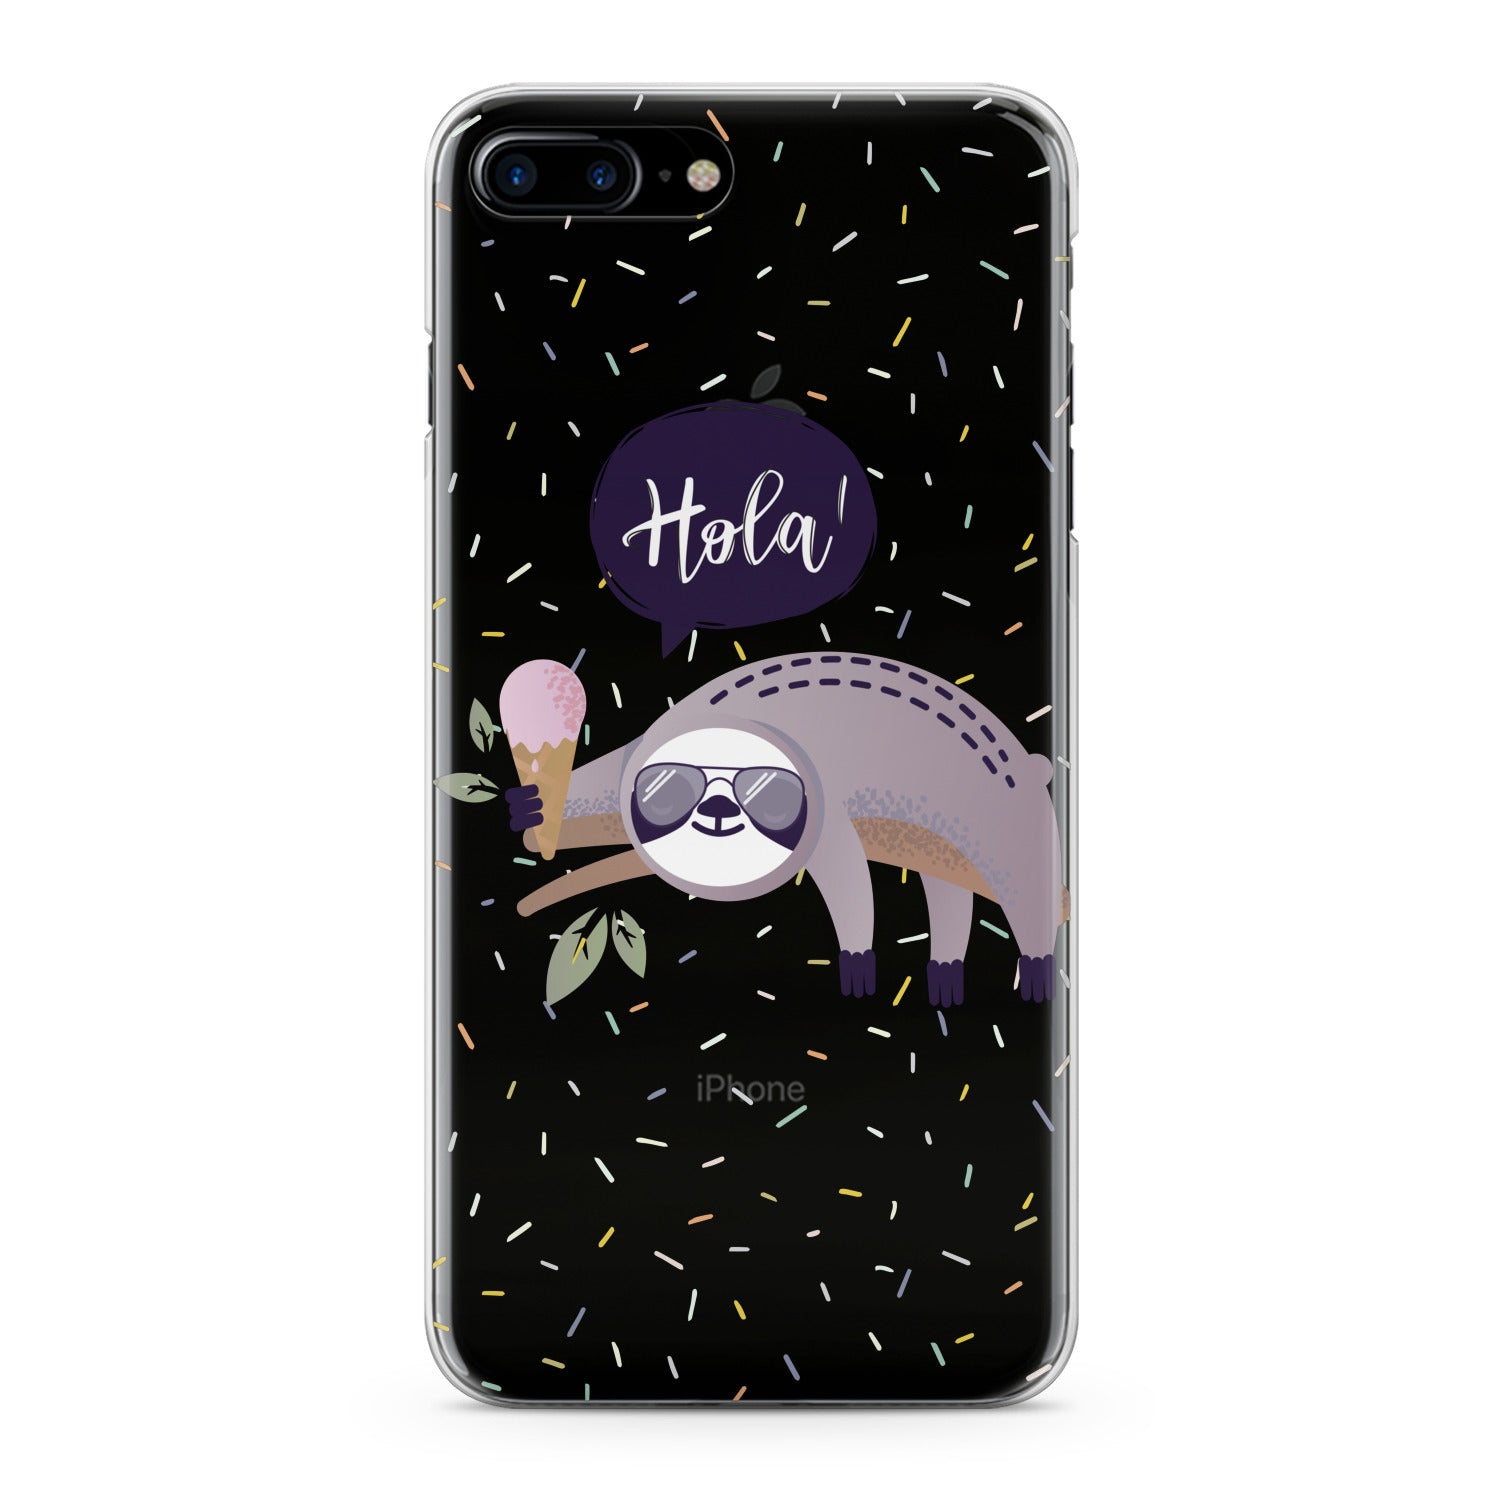 Lex Altern Sloth Ice Cream Phone Case for your iPhone & Android phone.